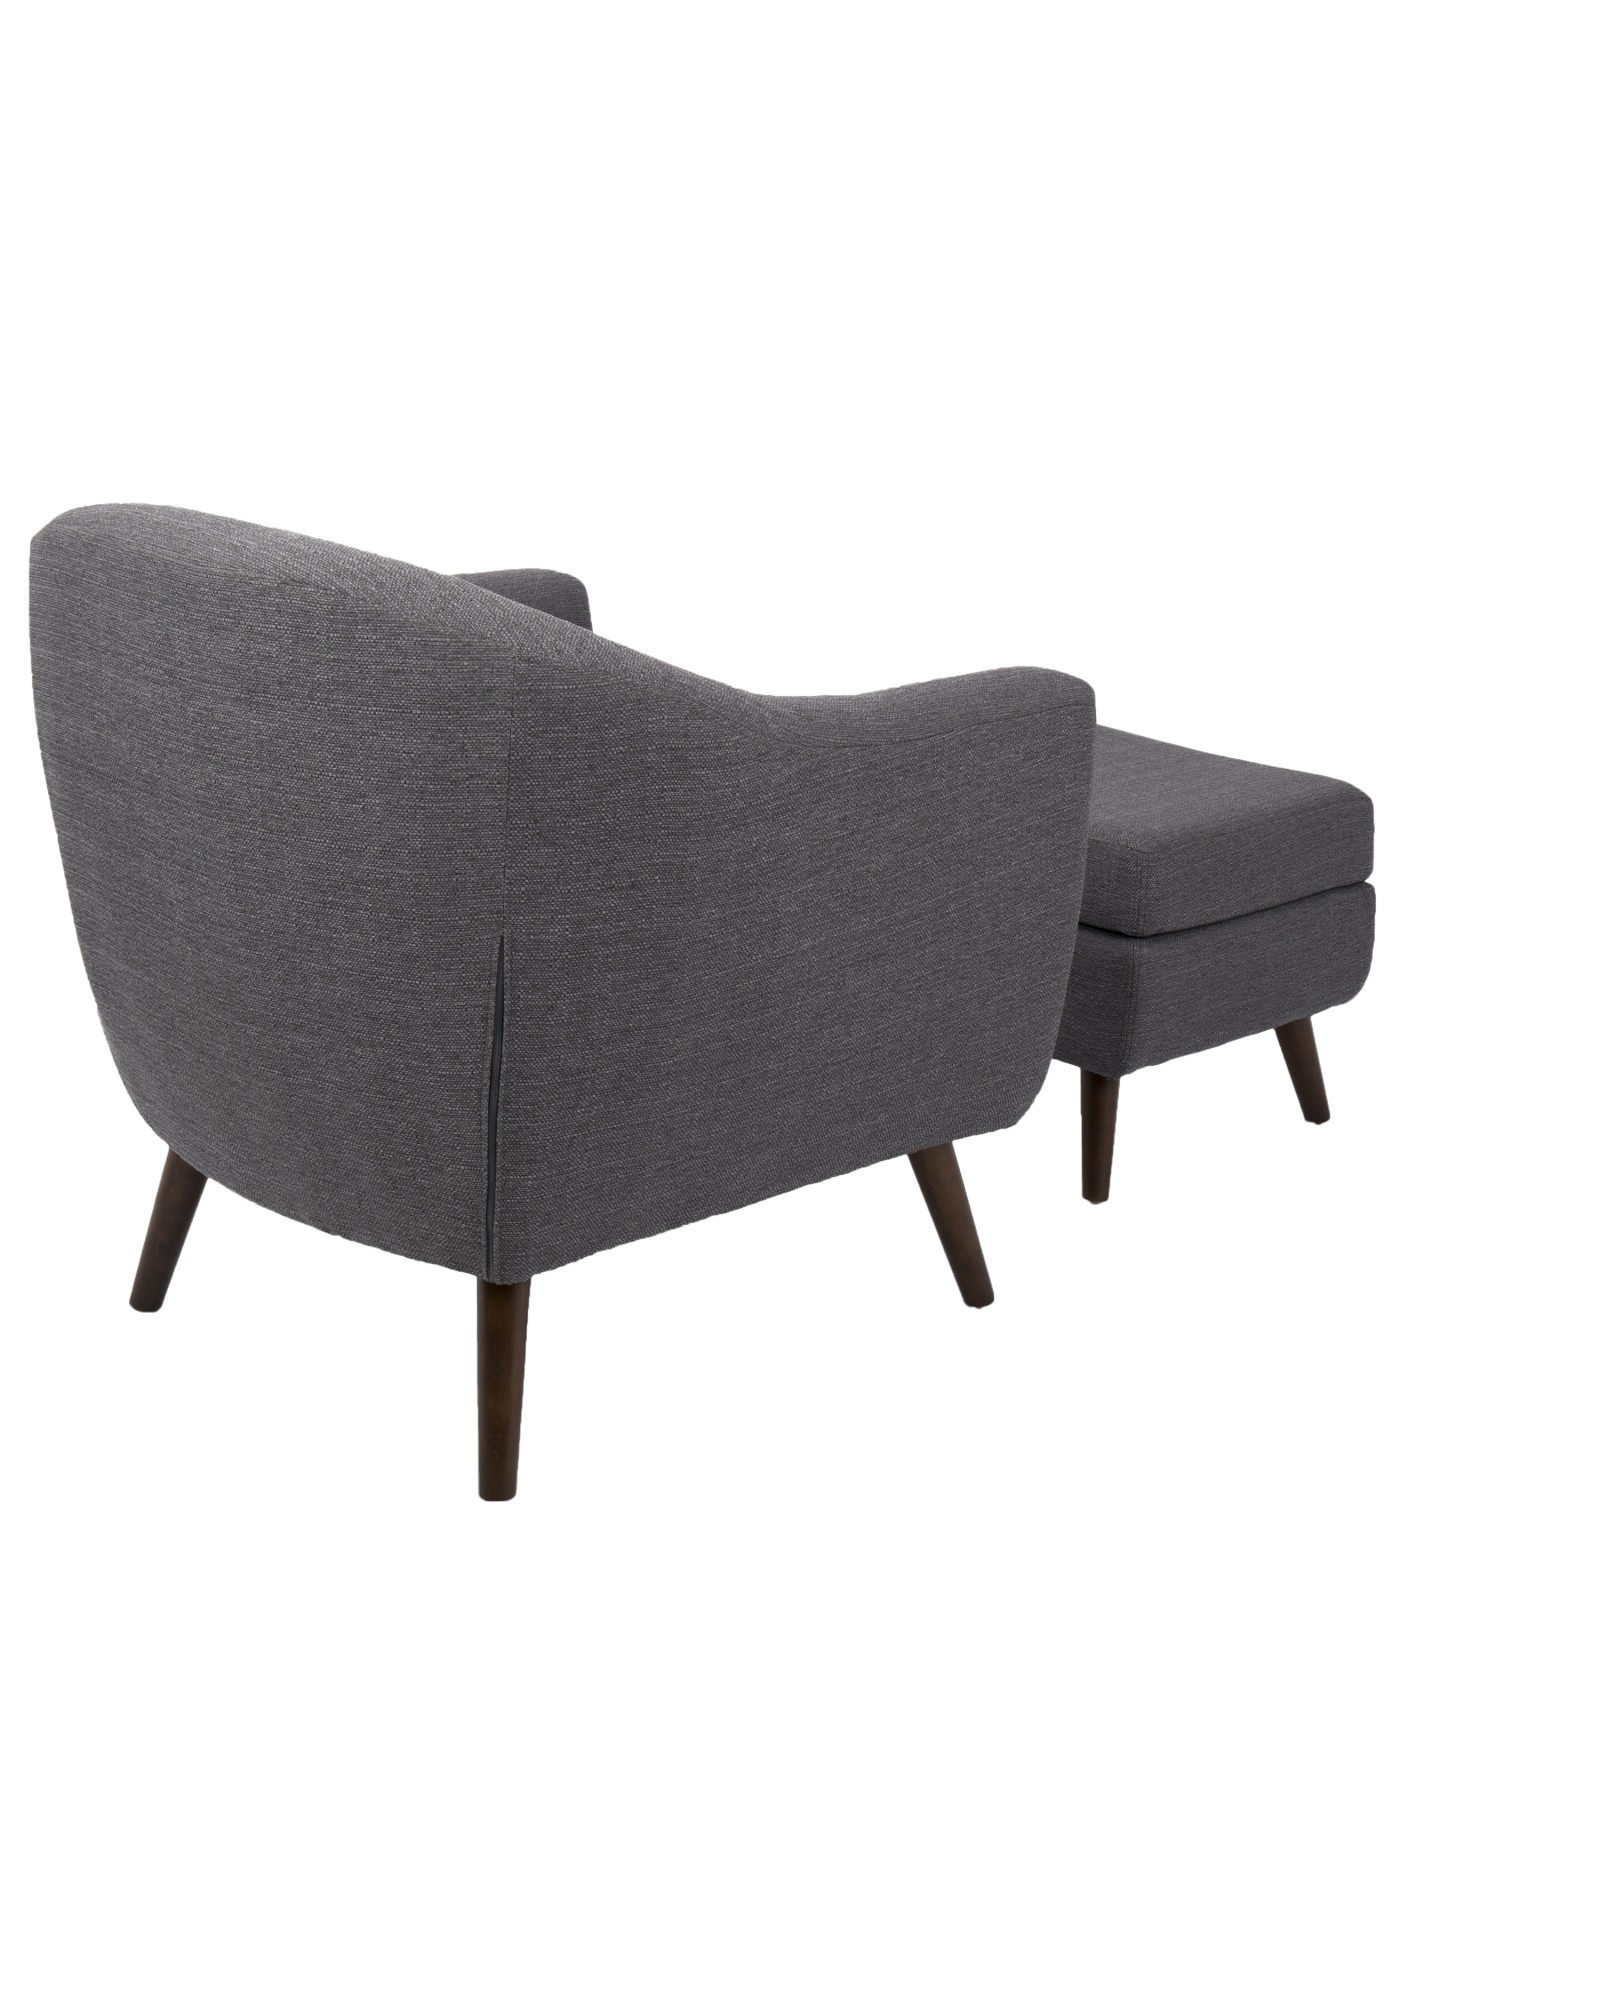 Rockwell Mid-Century Modern Accent Chair and Ottoman in Charcoal Grey